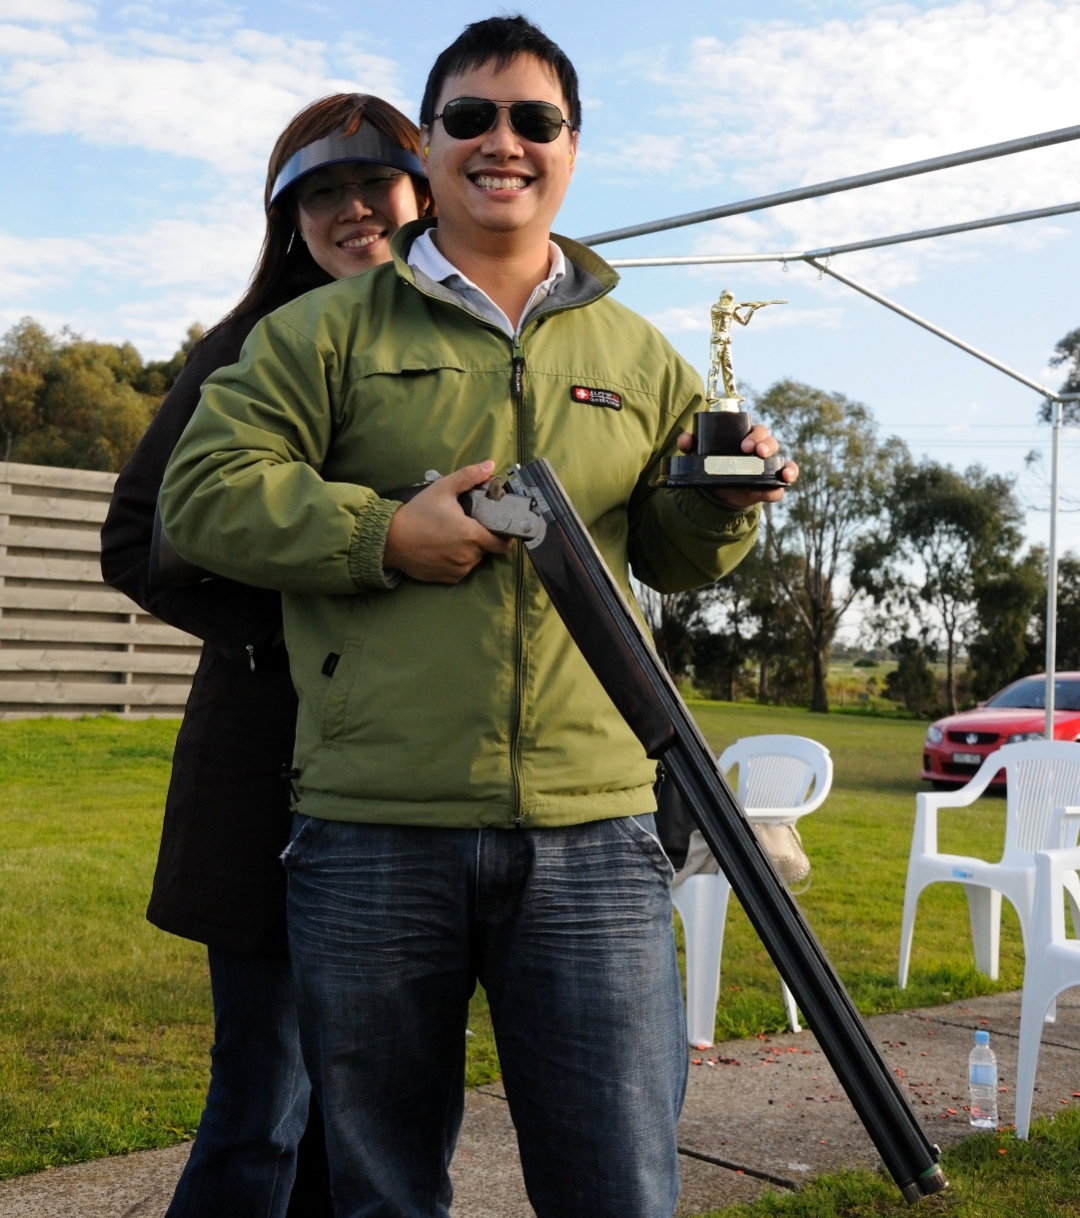 Exclusive session for 1 - Unlimited Clay Target Shooting with Olympic Medalist & 3 x World # 1 Adam Vella - Gift Voucher